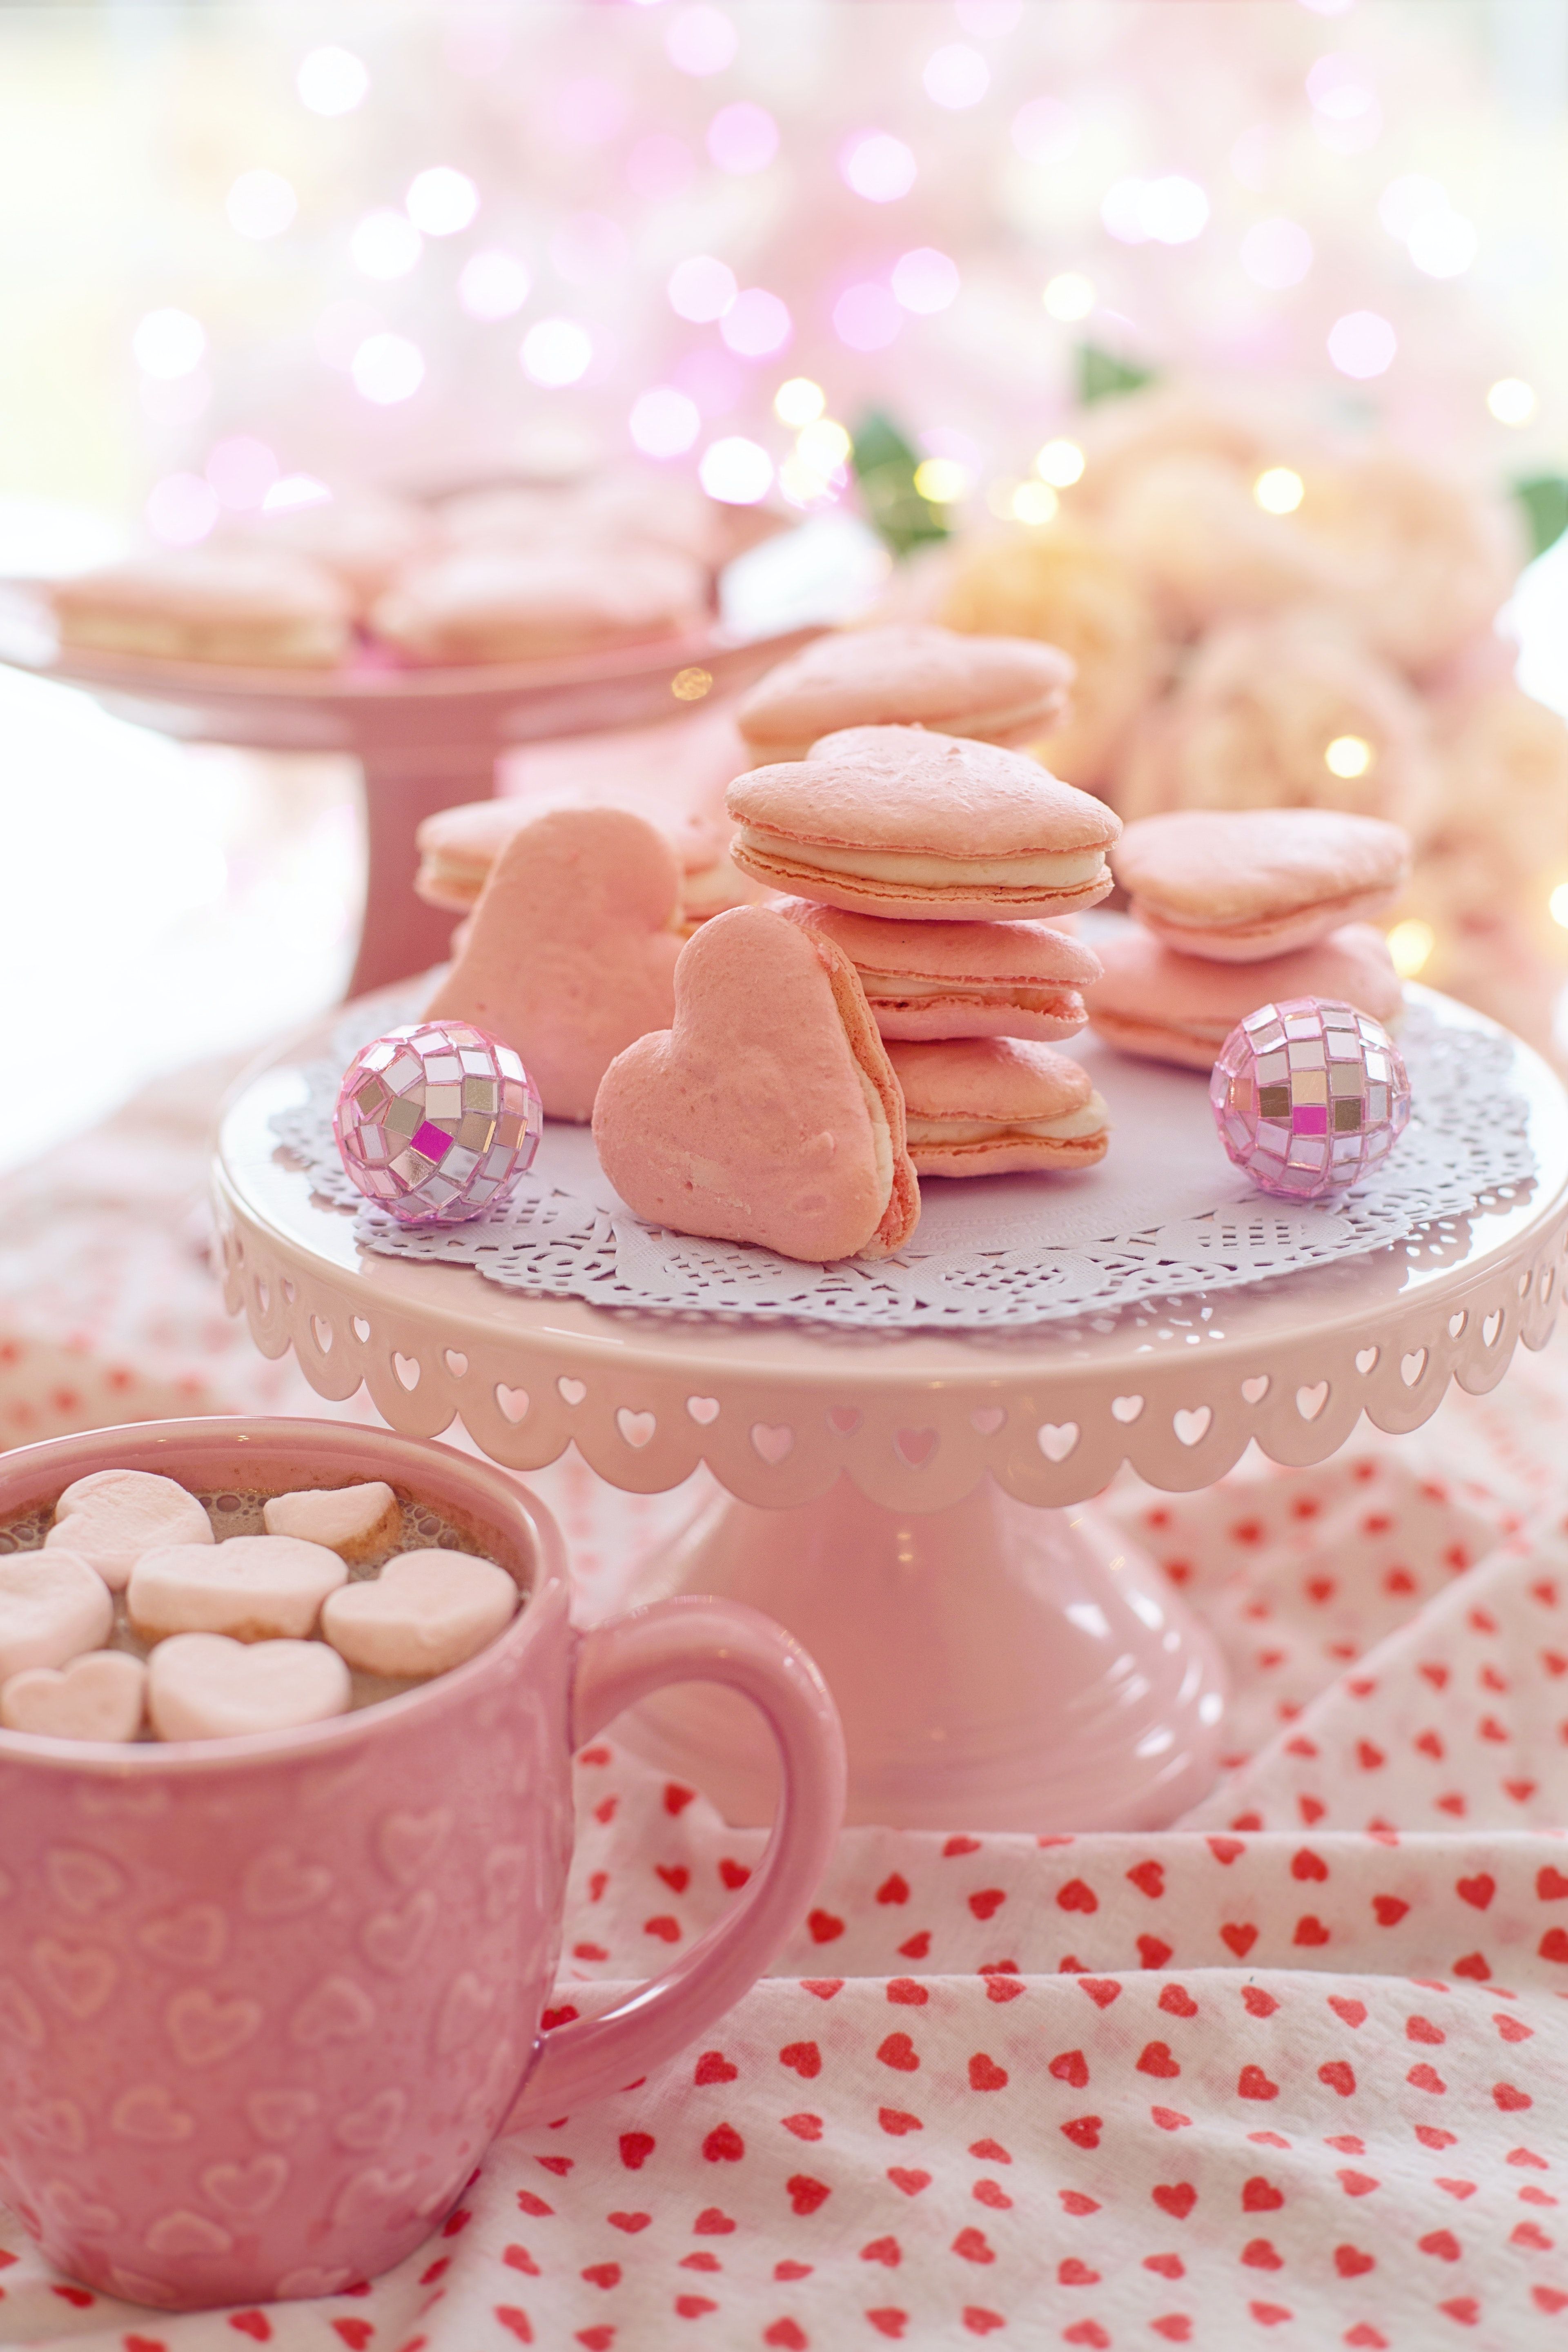 A pink cup of coffee and some cookies - Lovecore